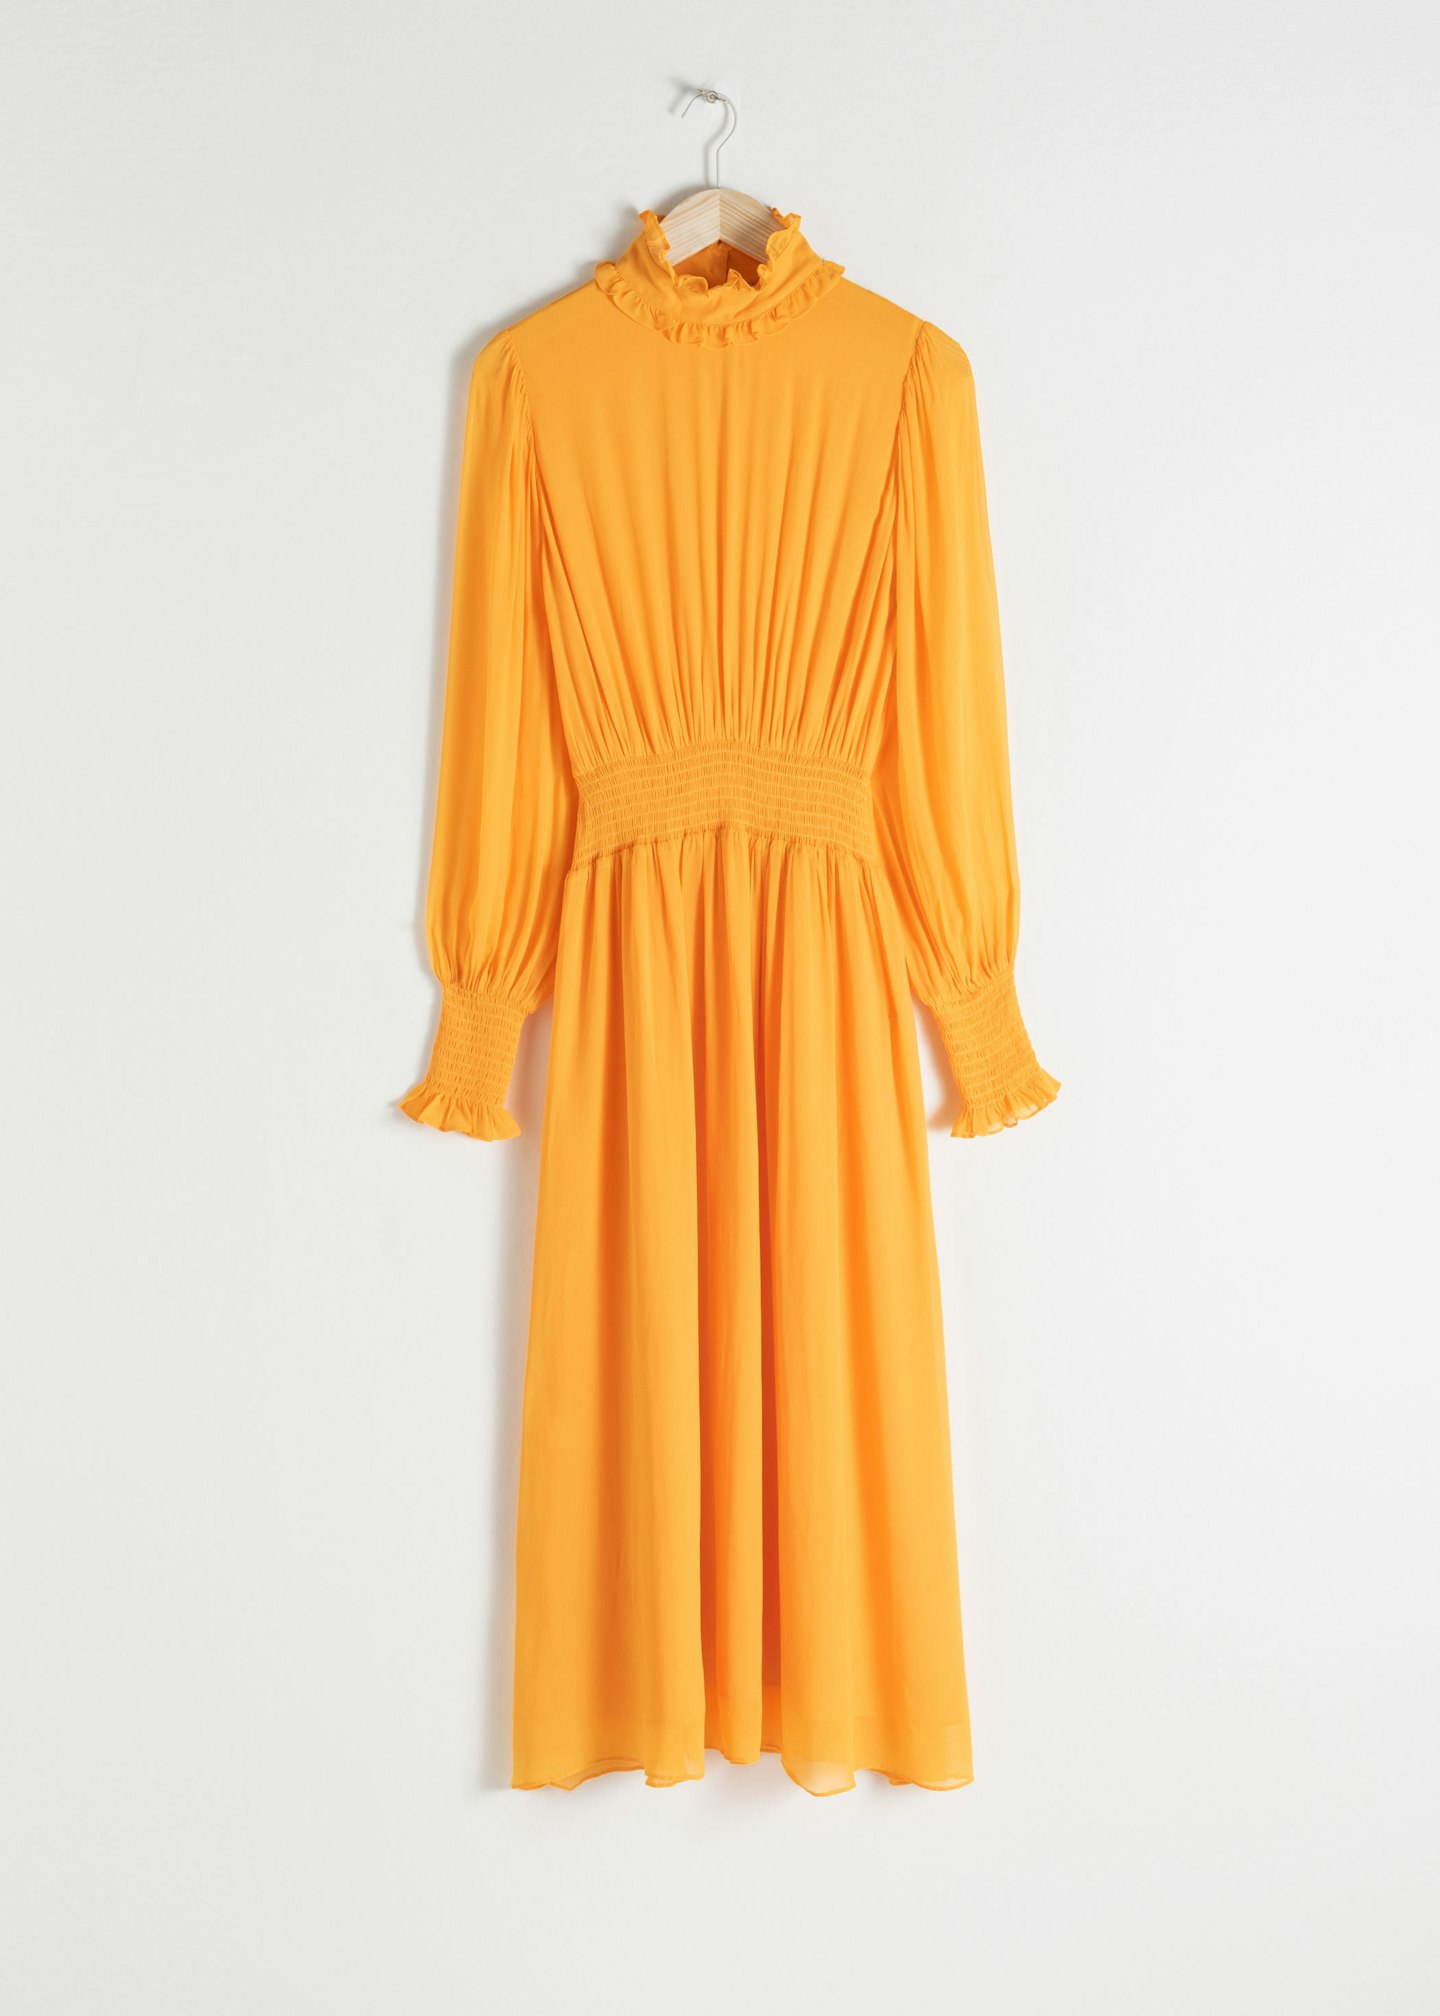 & Other Stories, High Neck Ruched Midi Dress, £89